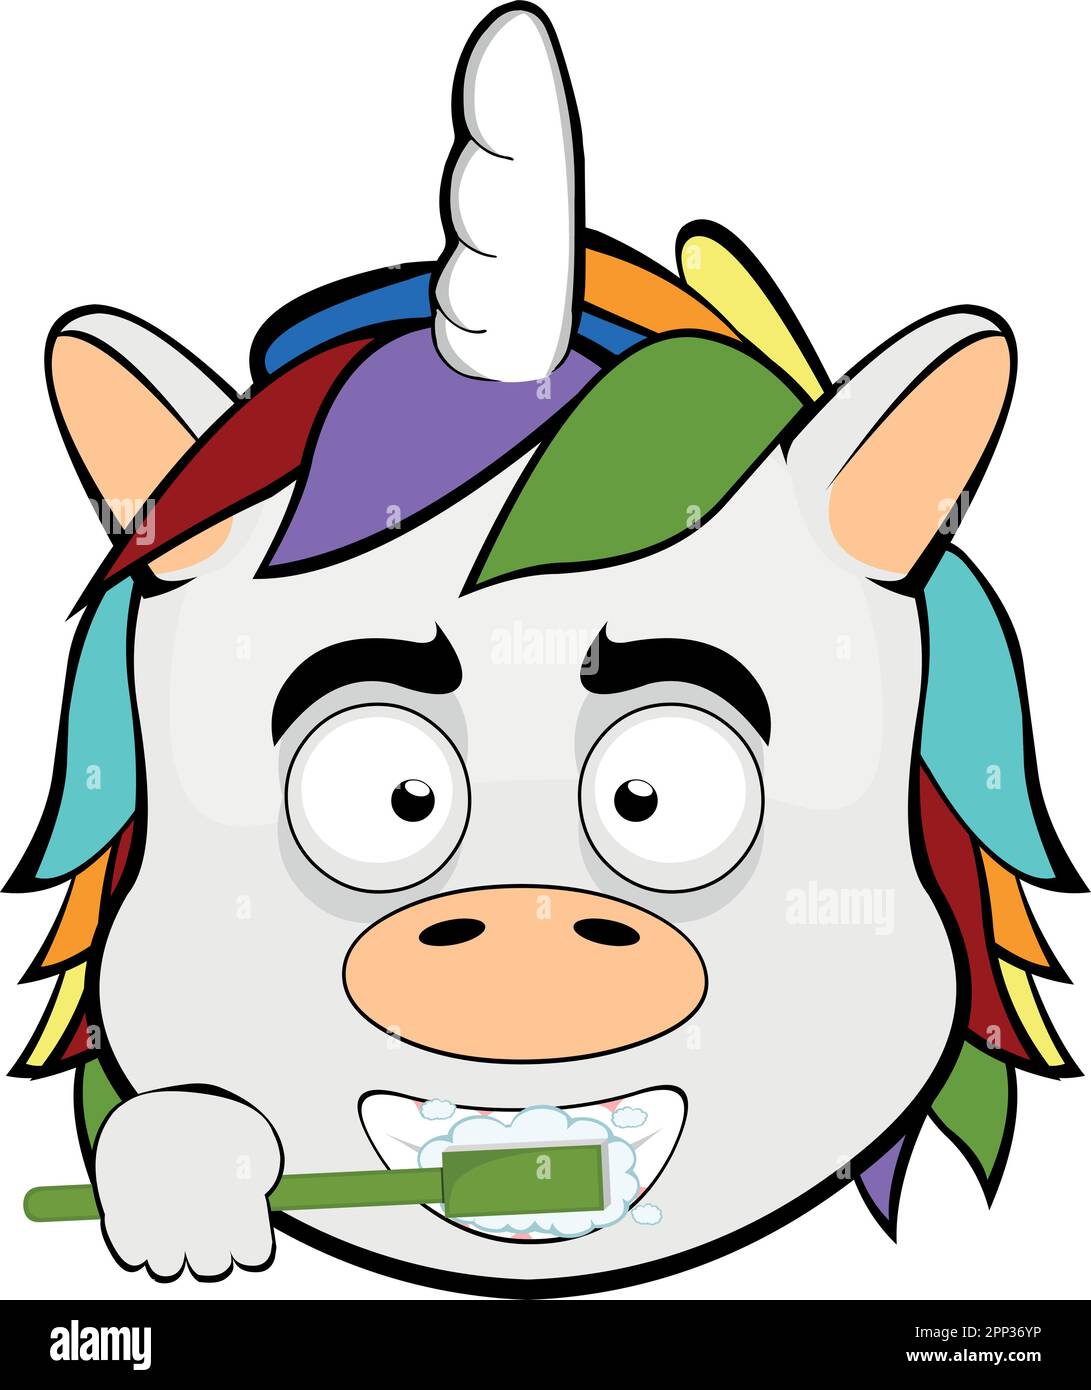 Vector illustration face of a cartoon unicorn brushing his teeth with a toothbrush Stock Vector